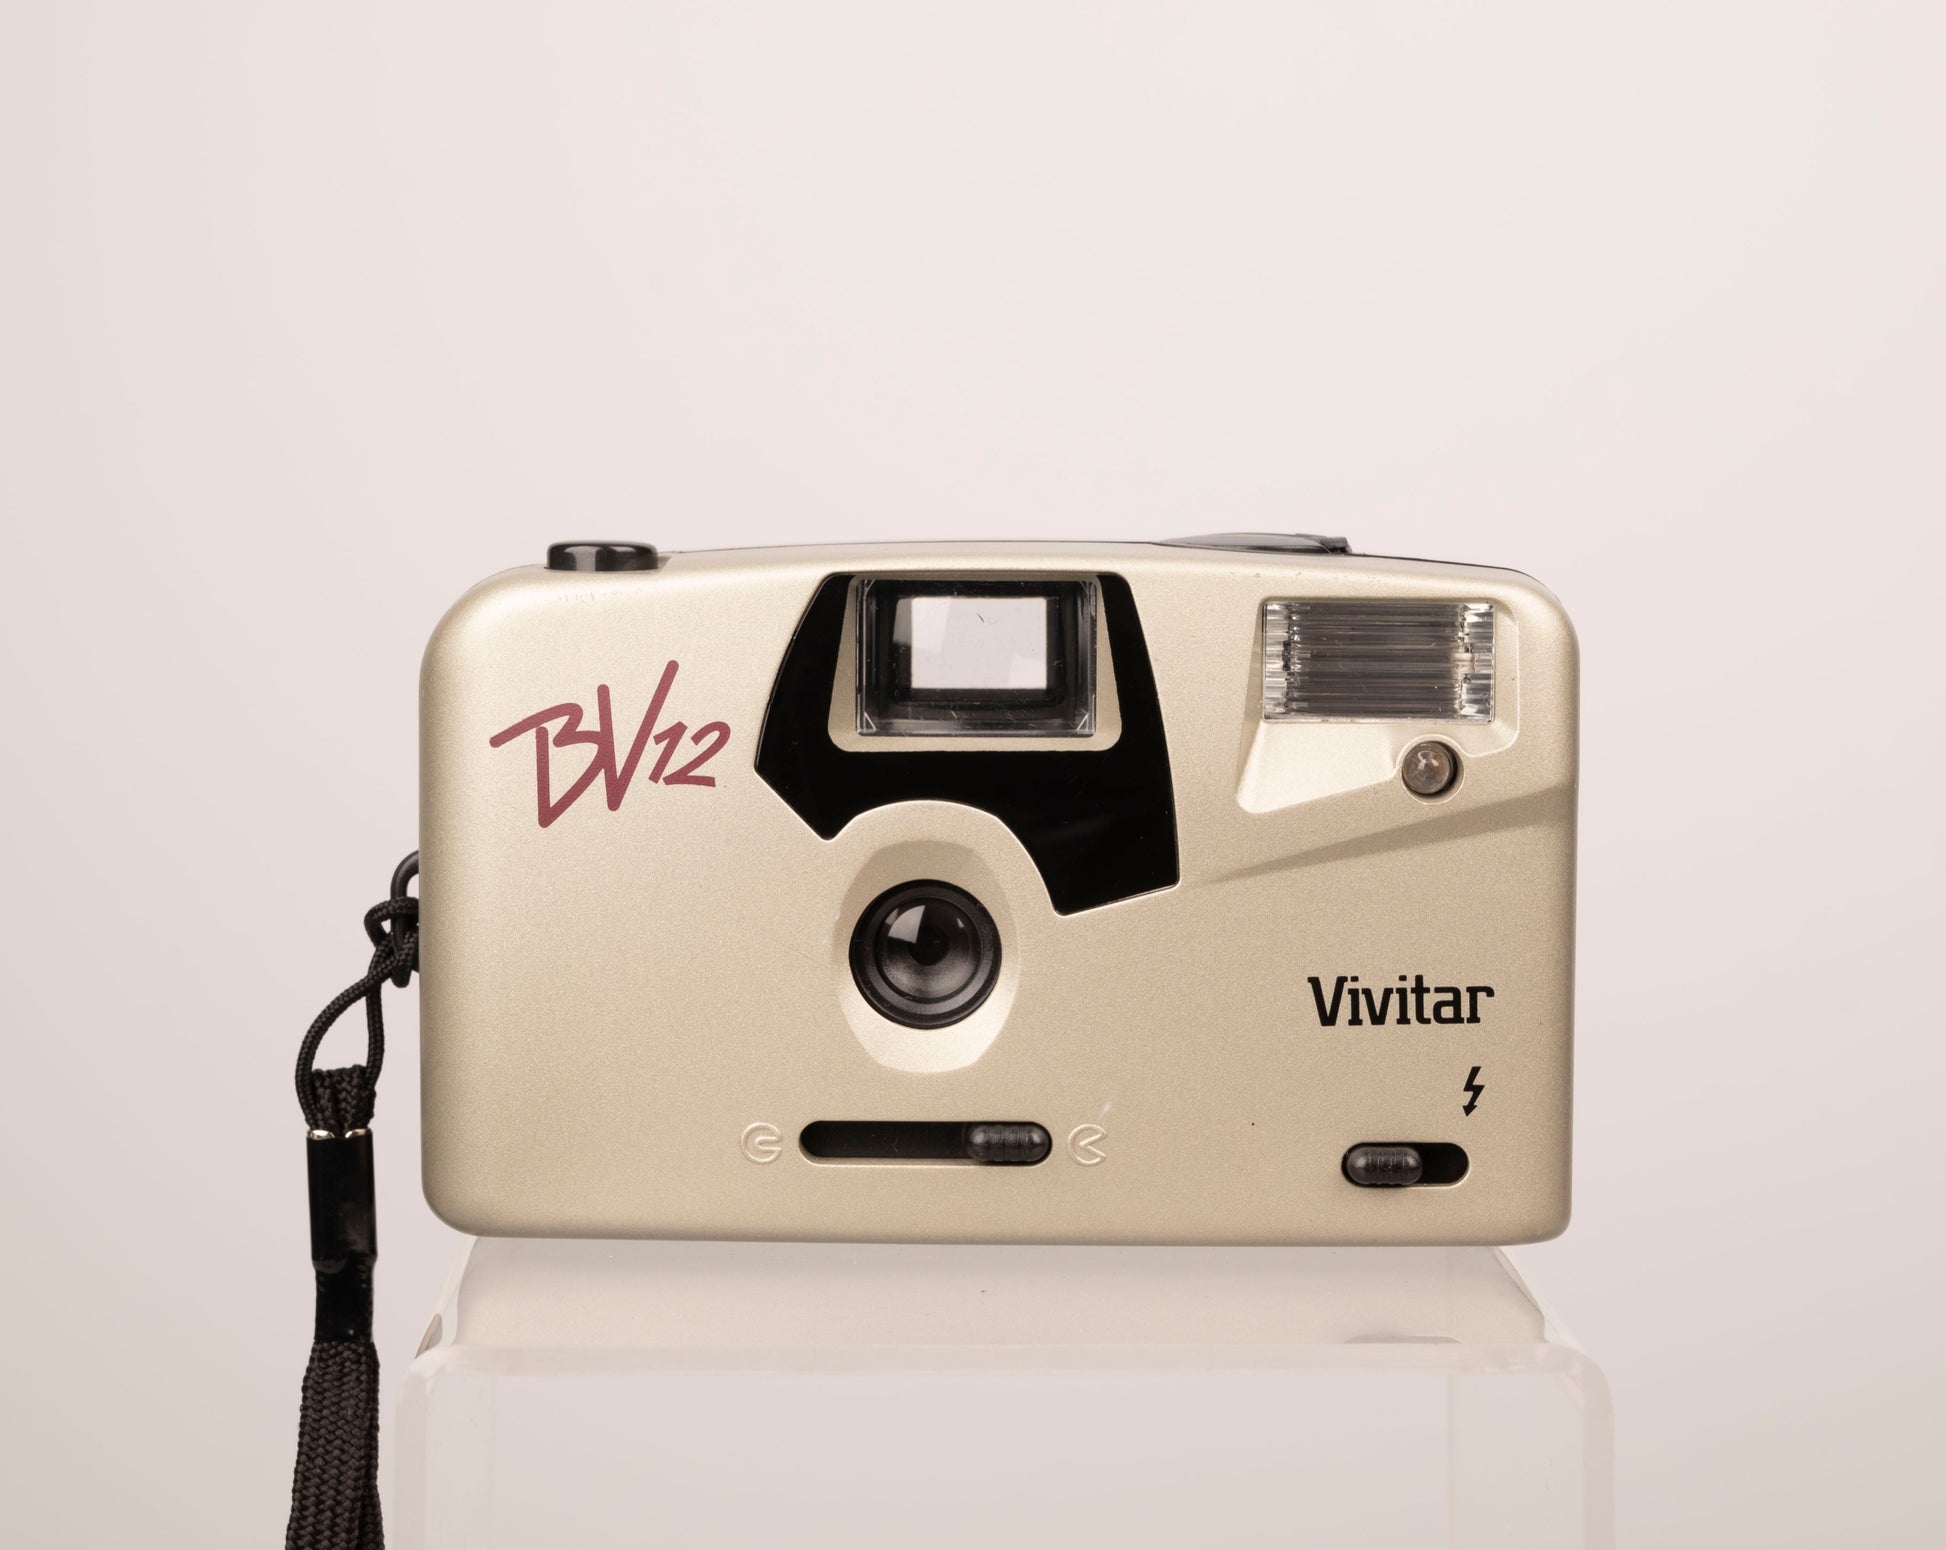 The Vivitar BV12 is a very simple, compact, and lightweight 35mm point-and-shoot